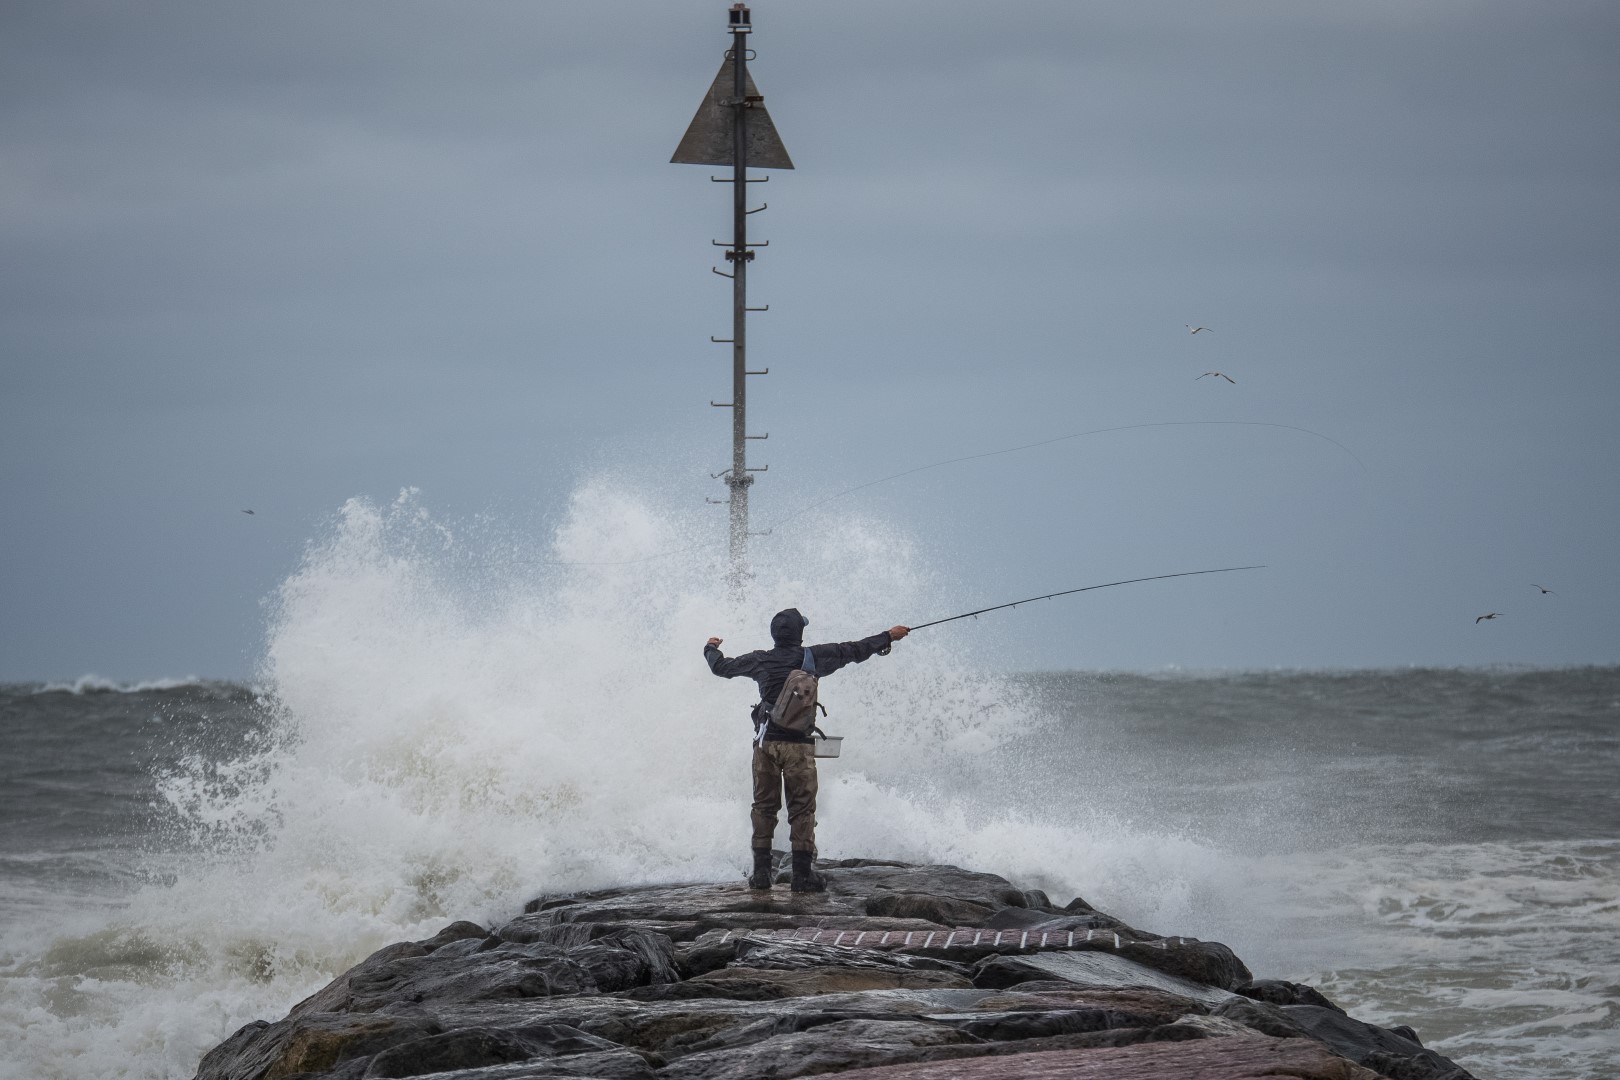 Nor'easter fly fishing, Long Island, New York